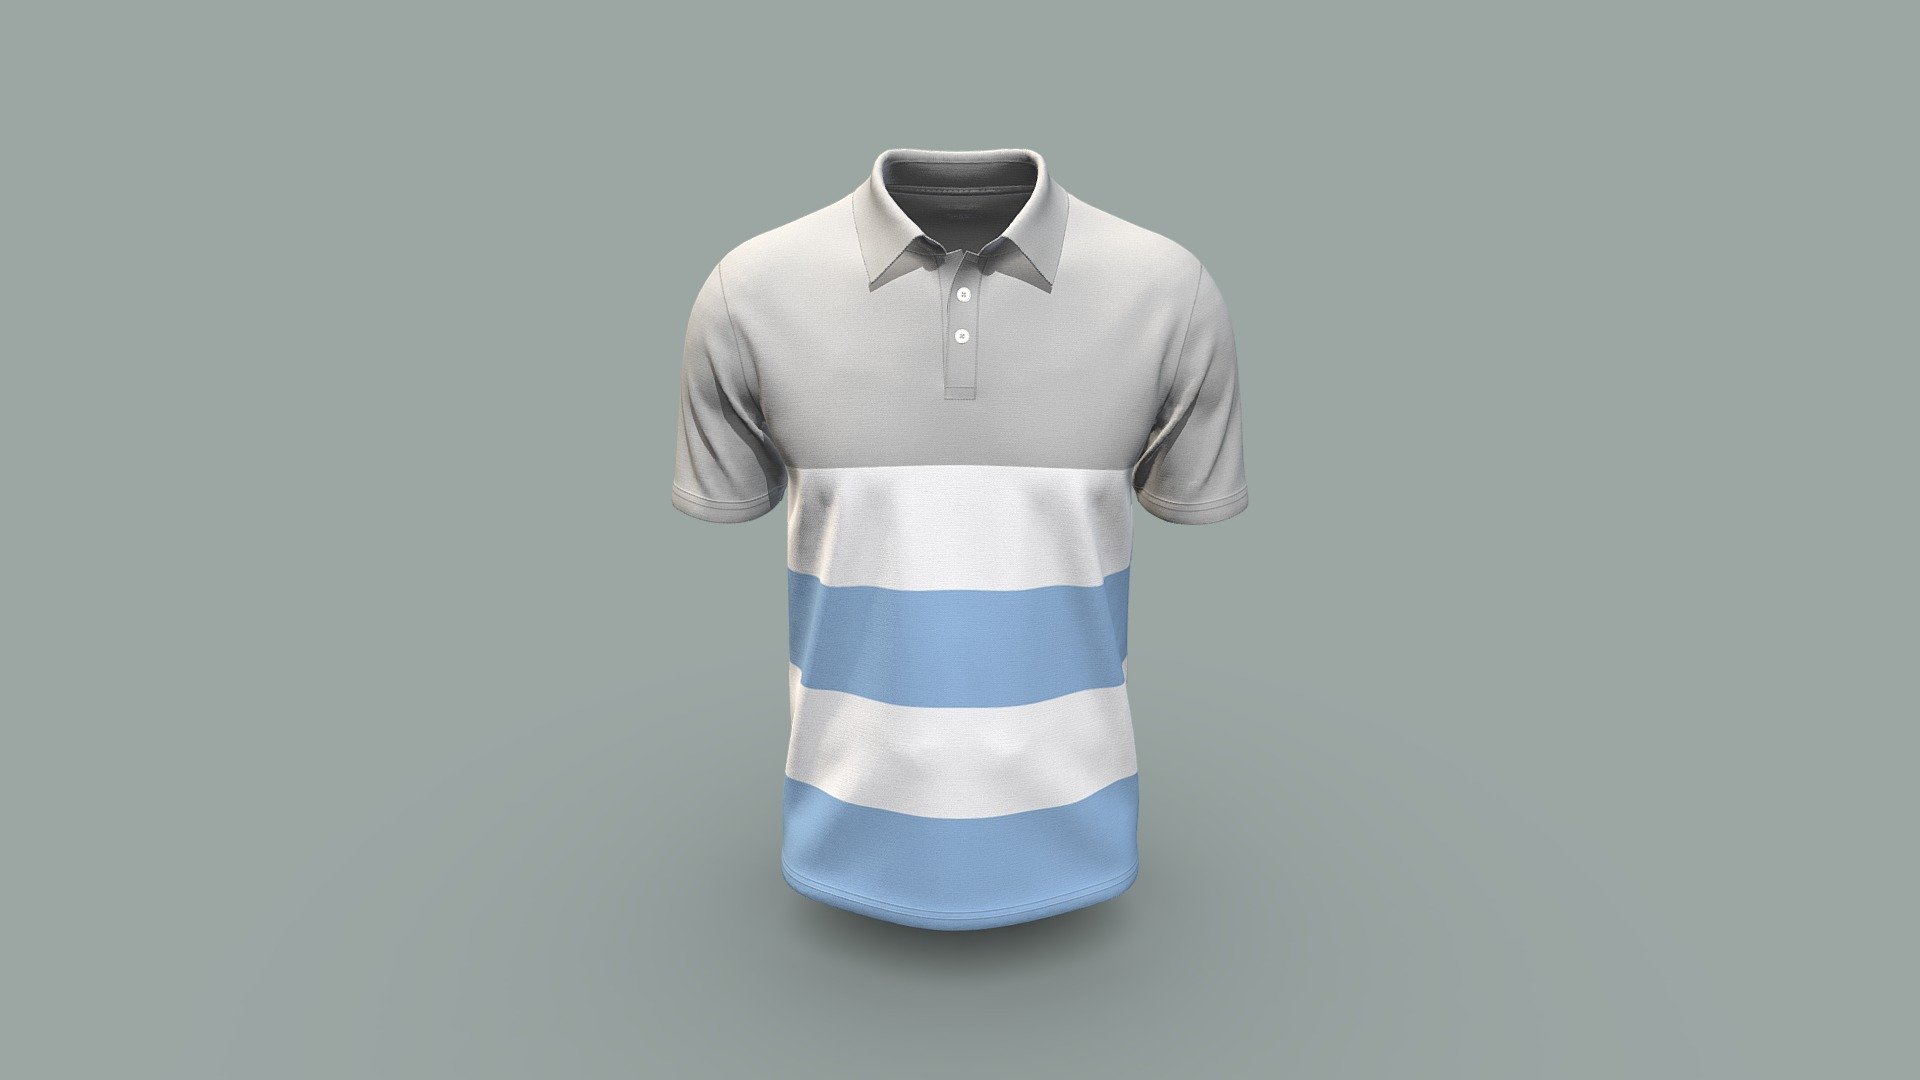 Cloth Title = Top Mens Knit Fashion Polo 

SKU = DG100202 

Category = Men 

Product Type = Polo 

Cloth Length = Regular 

Body Fit = Regular Fit 

Occasion = Casual  

Sleeve Style = Short Sleeve 


Our Services:

3D Apparel Design.

OBJ,FBX,GLTF Making with High/Low Poly.

Fabric Digitalization.

Mockup making.

3D Teck Pack.

Pattern Making.

2D Illustration.

Cloth Animation and 360 Spin Video.


Contact us:- 

Email: info@digitalfashionwear.com 

Website: https://digitalfashionwear.com 


We designed all the types of cloth specially focused on product visualization, e-commerce, fitting, and production. 

We will design: 

T-shirts 

Polo shirts 

Hoodies 

Sweatshirt 

Jackets 

Shirts 

TankTops 

Trousers 

Bras 

Underwear 

Blazer 

Aprons 

Leggings 

and All Fashion items. 





Our goal is to make sure what we provide you, meets your demand 3d model